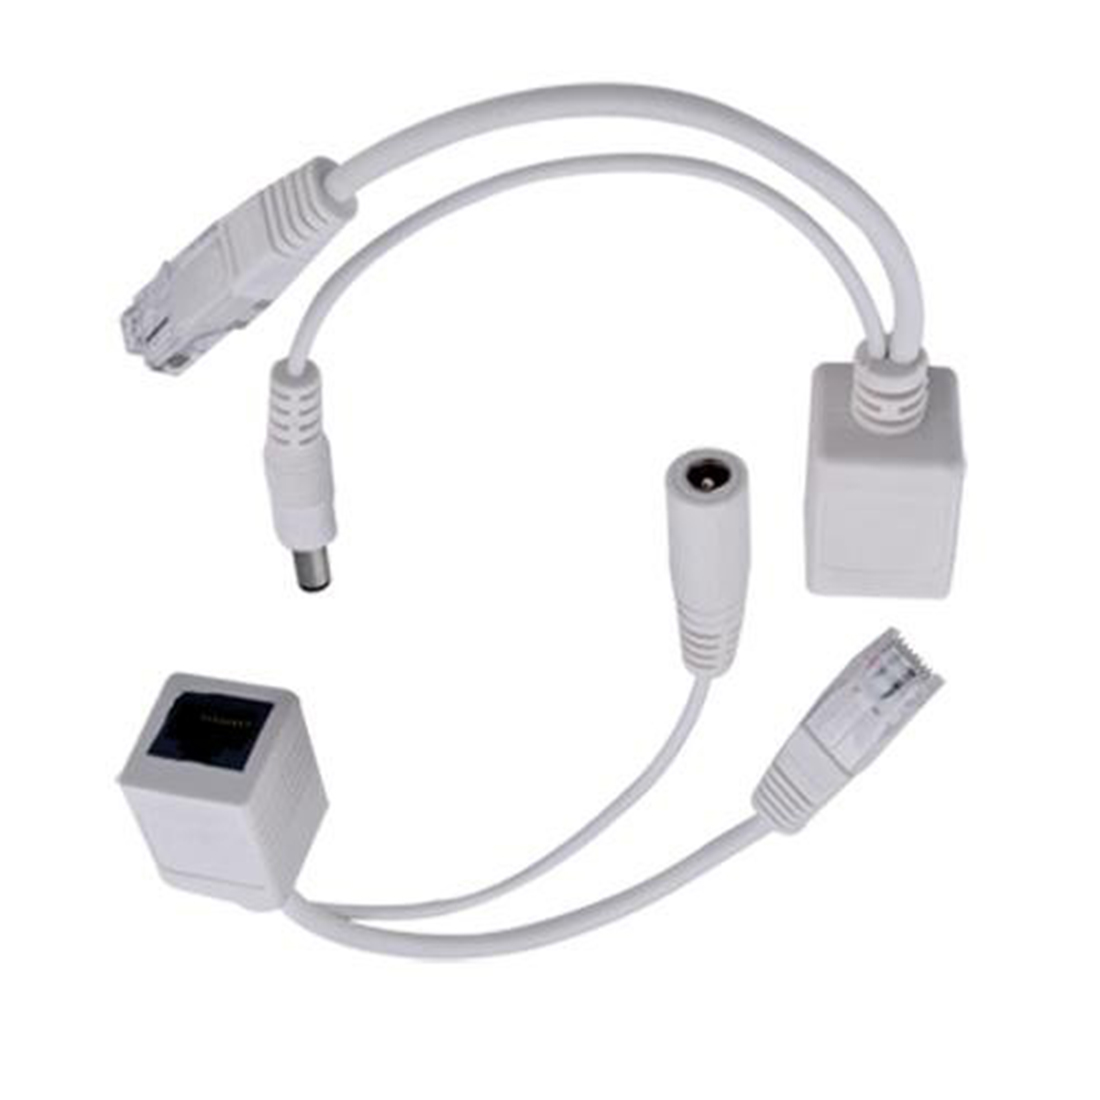 2015 White Poe Power Over Ethernet Injector Splitter Cable Kit For Ip Telephones Cameras